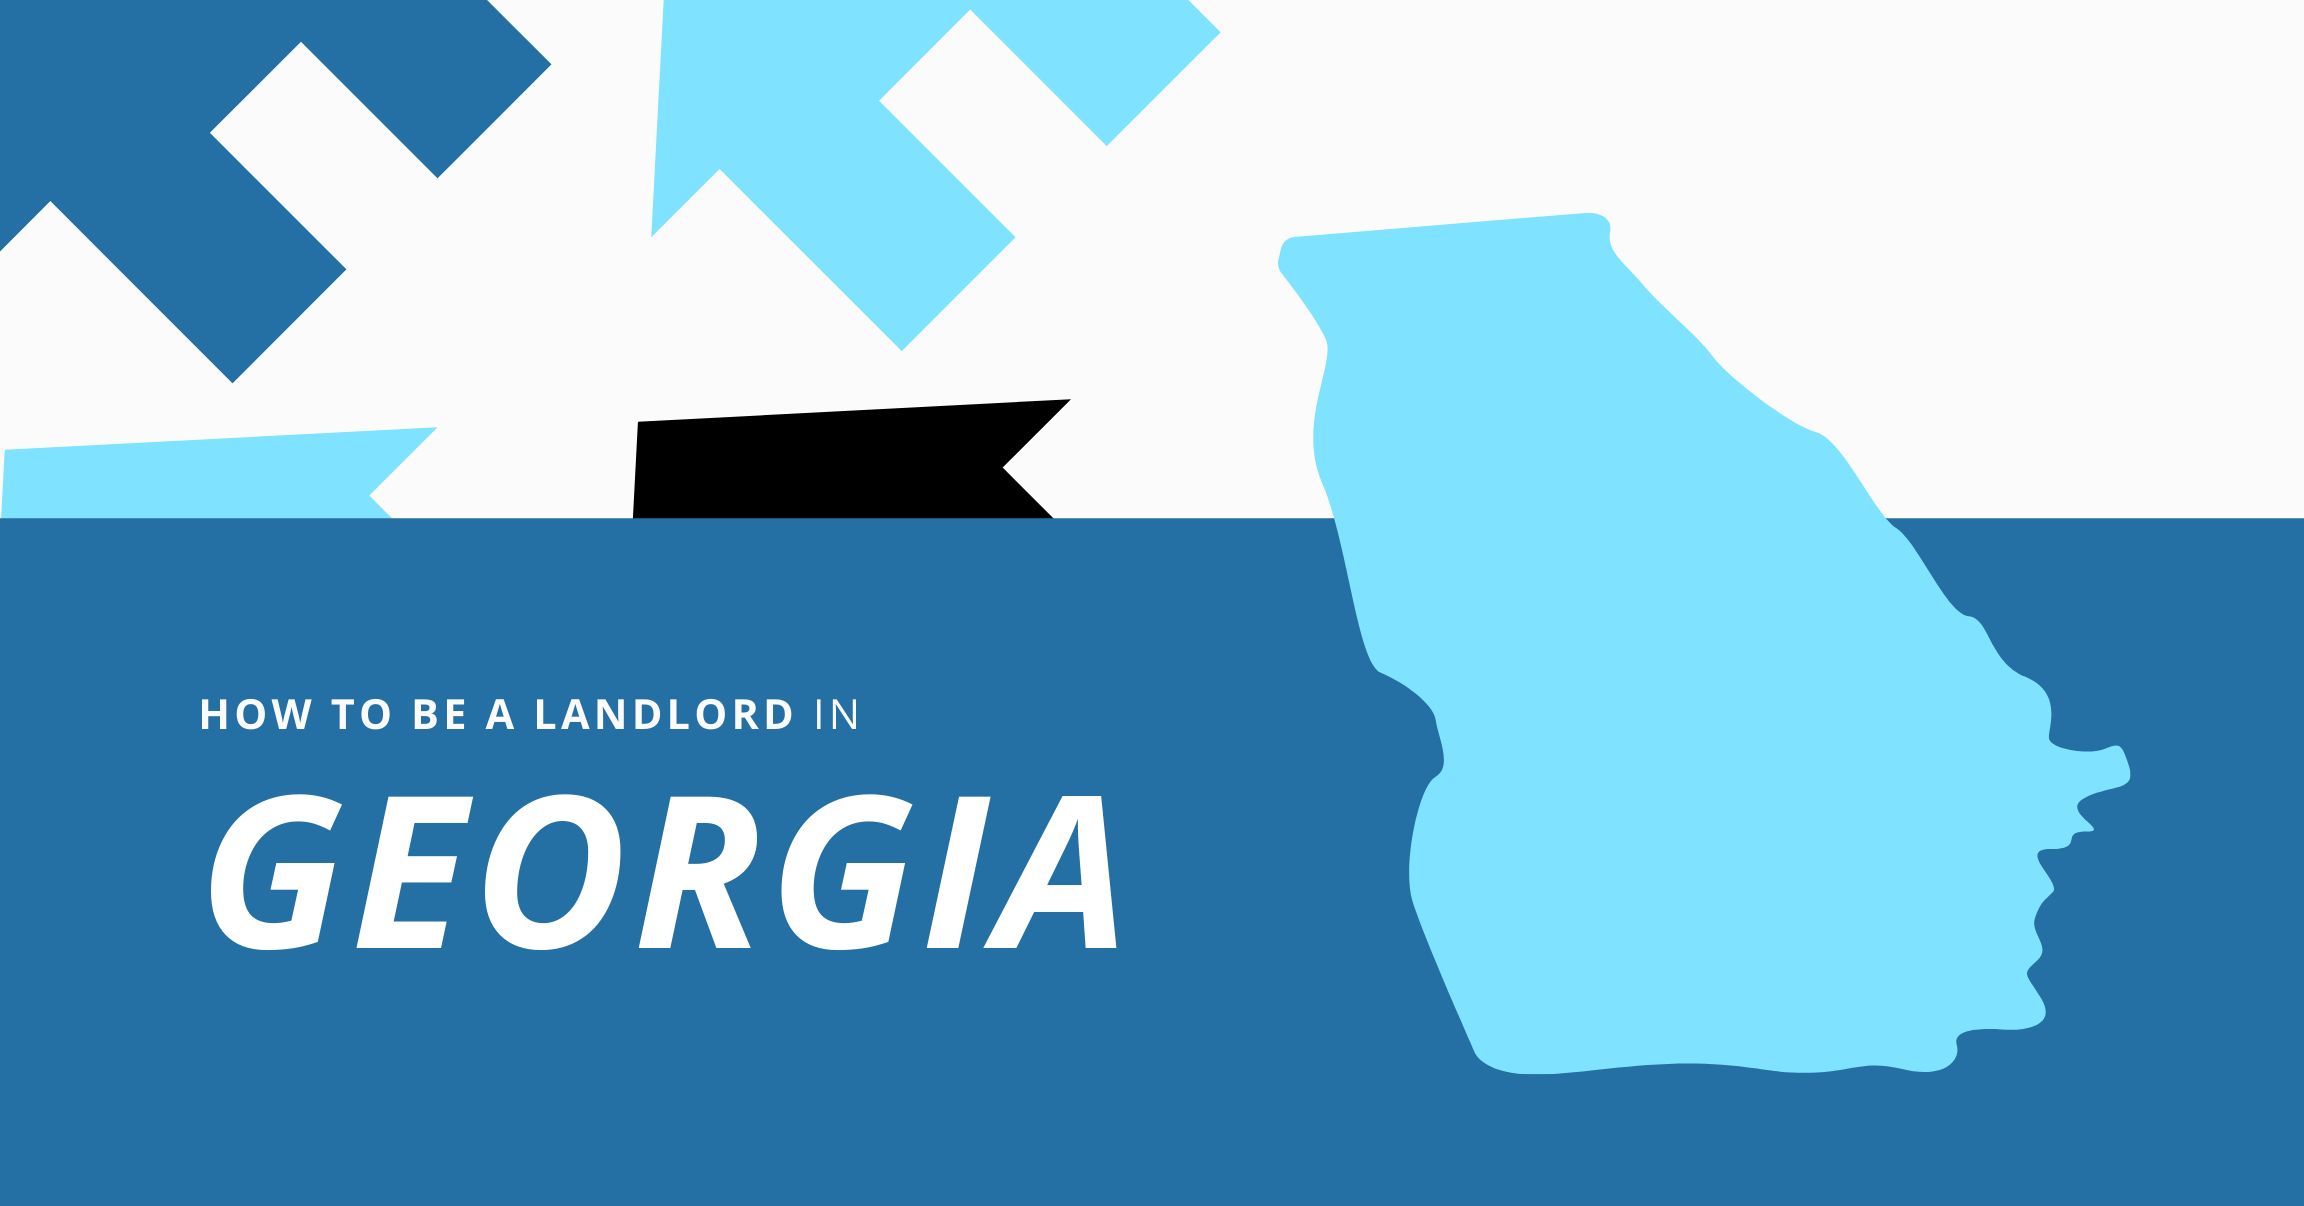 How to be a landlord in Georgia